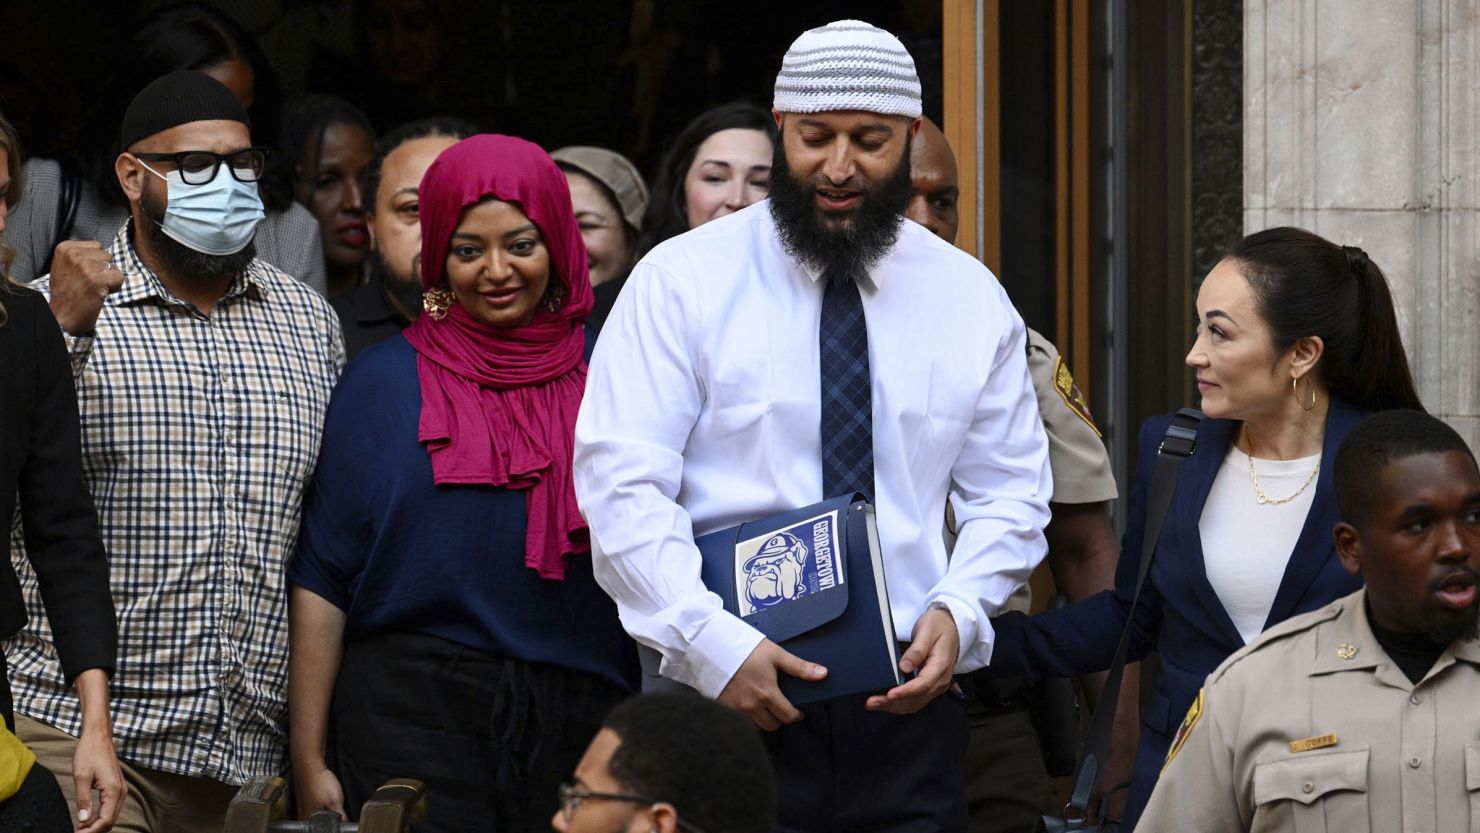 Adnan Syed, center right, leaves the courthouse after a hearing on Monday, Sept. 19, 2022, in Baltimore.